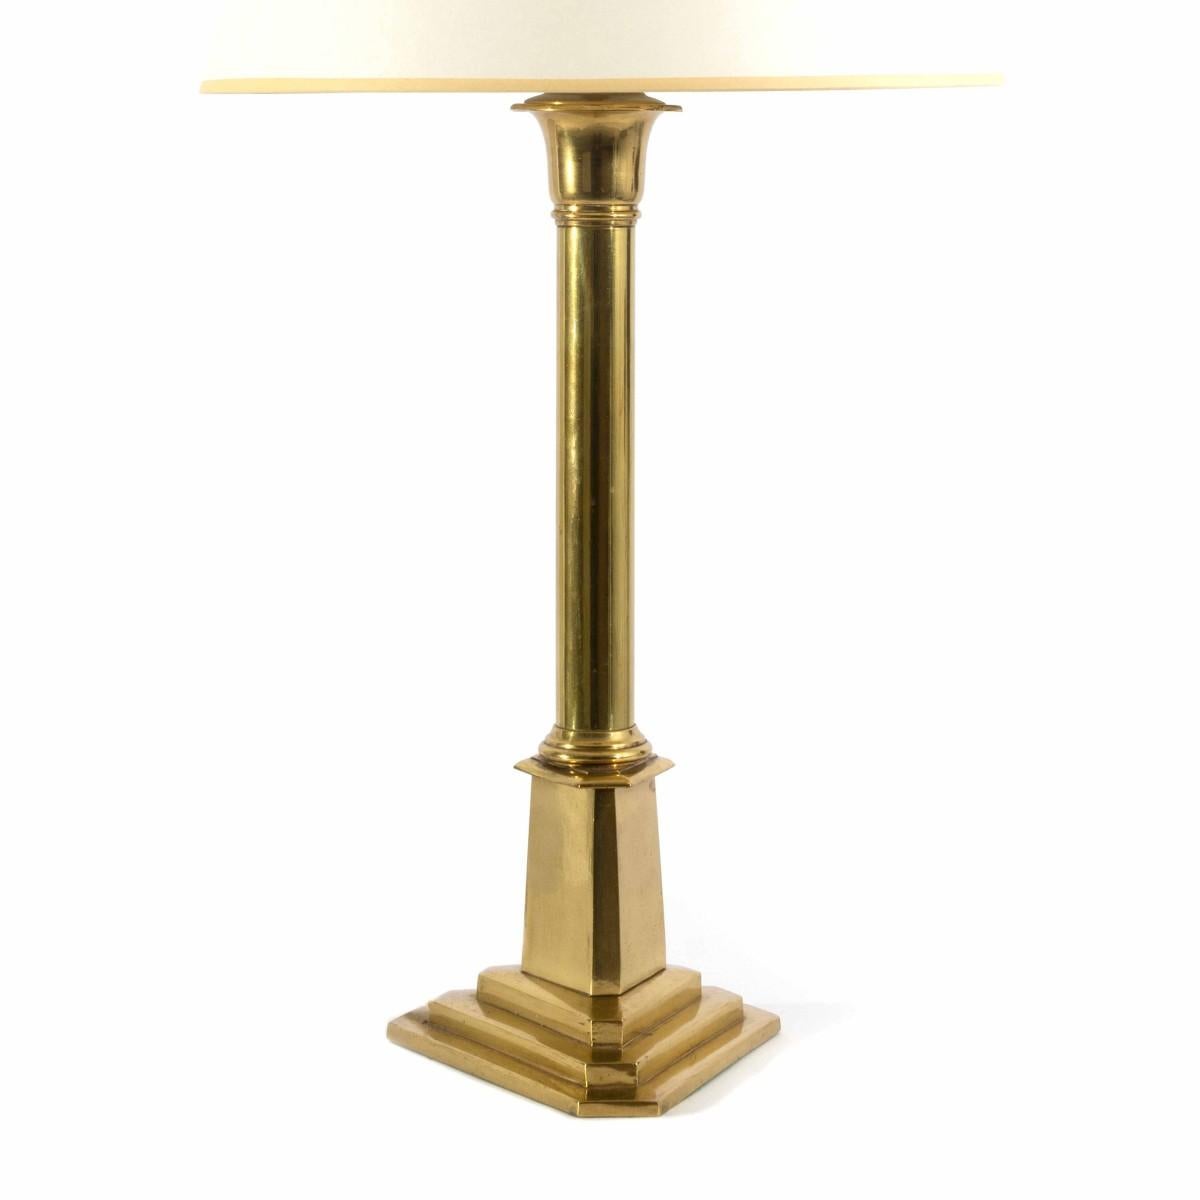 A vintage polished brass table lamp featuring a triangular-shaped base and custom shade, USA, circa 1970.
Wired for USA and UL listed; takes a standard base bulb, 100 watts max. 

The brass finish has a beautiful aged patina with some expected